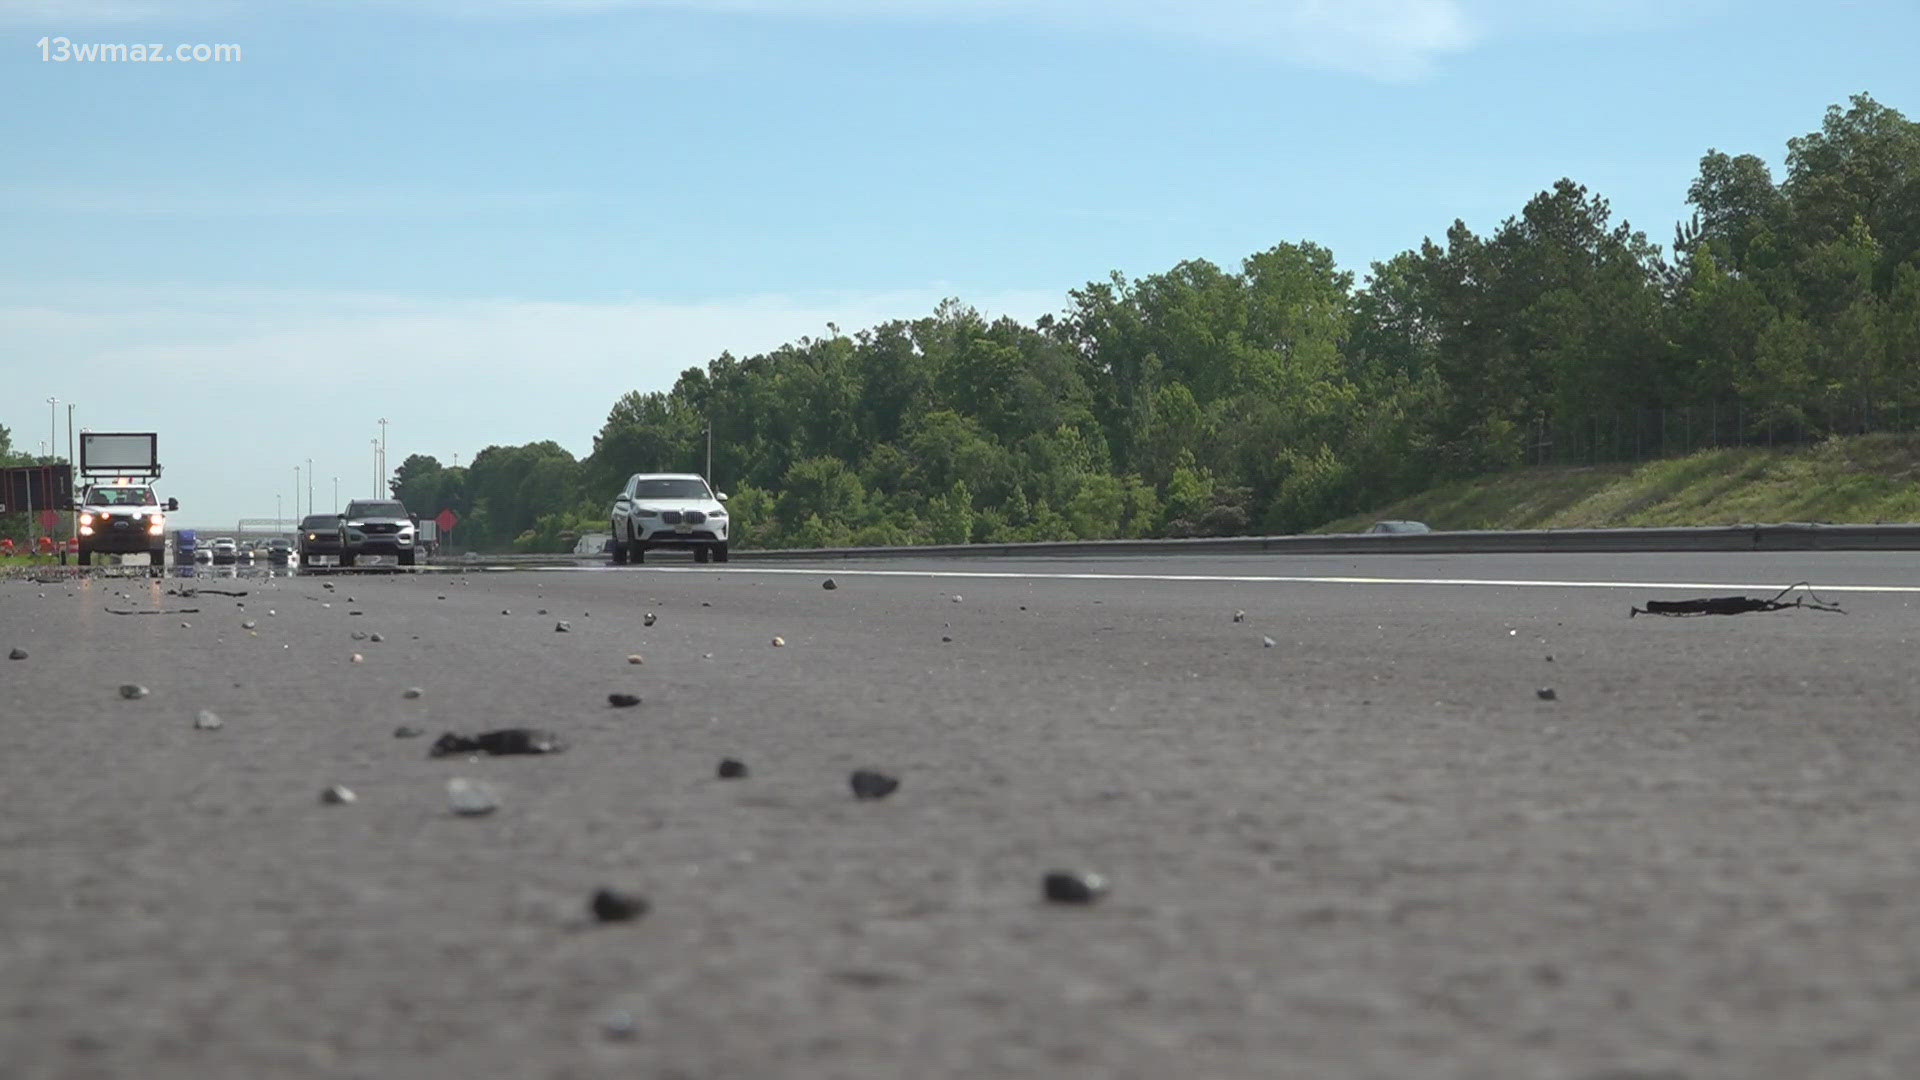 Contractors are continuing to improve the stretch roads of Interstate-75 between exits 149 and 155 that should complete this week, according to the state.